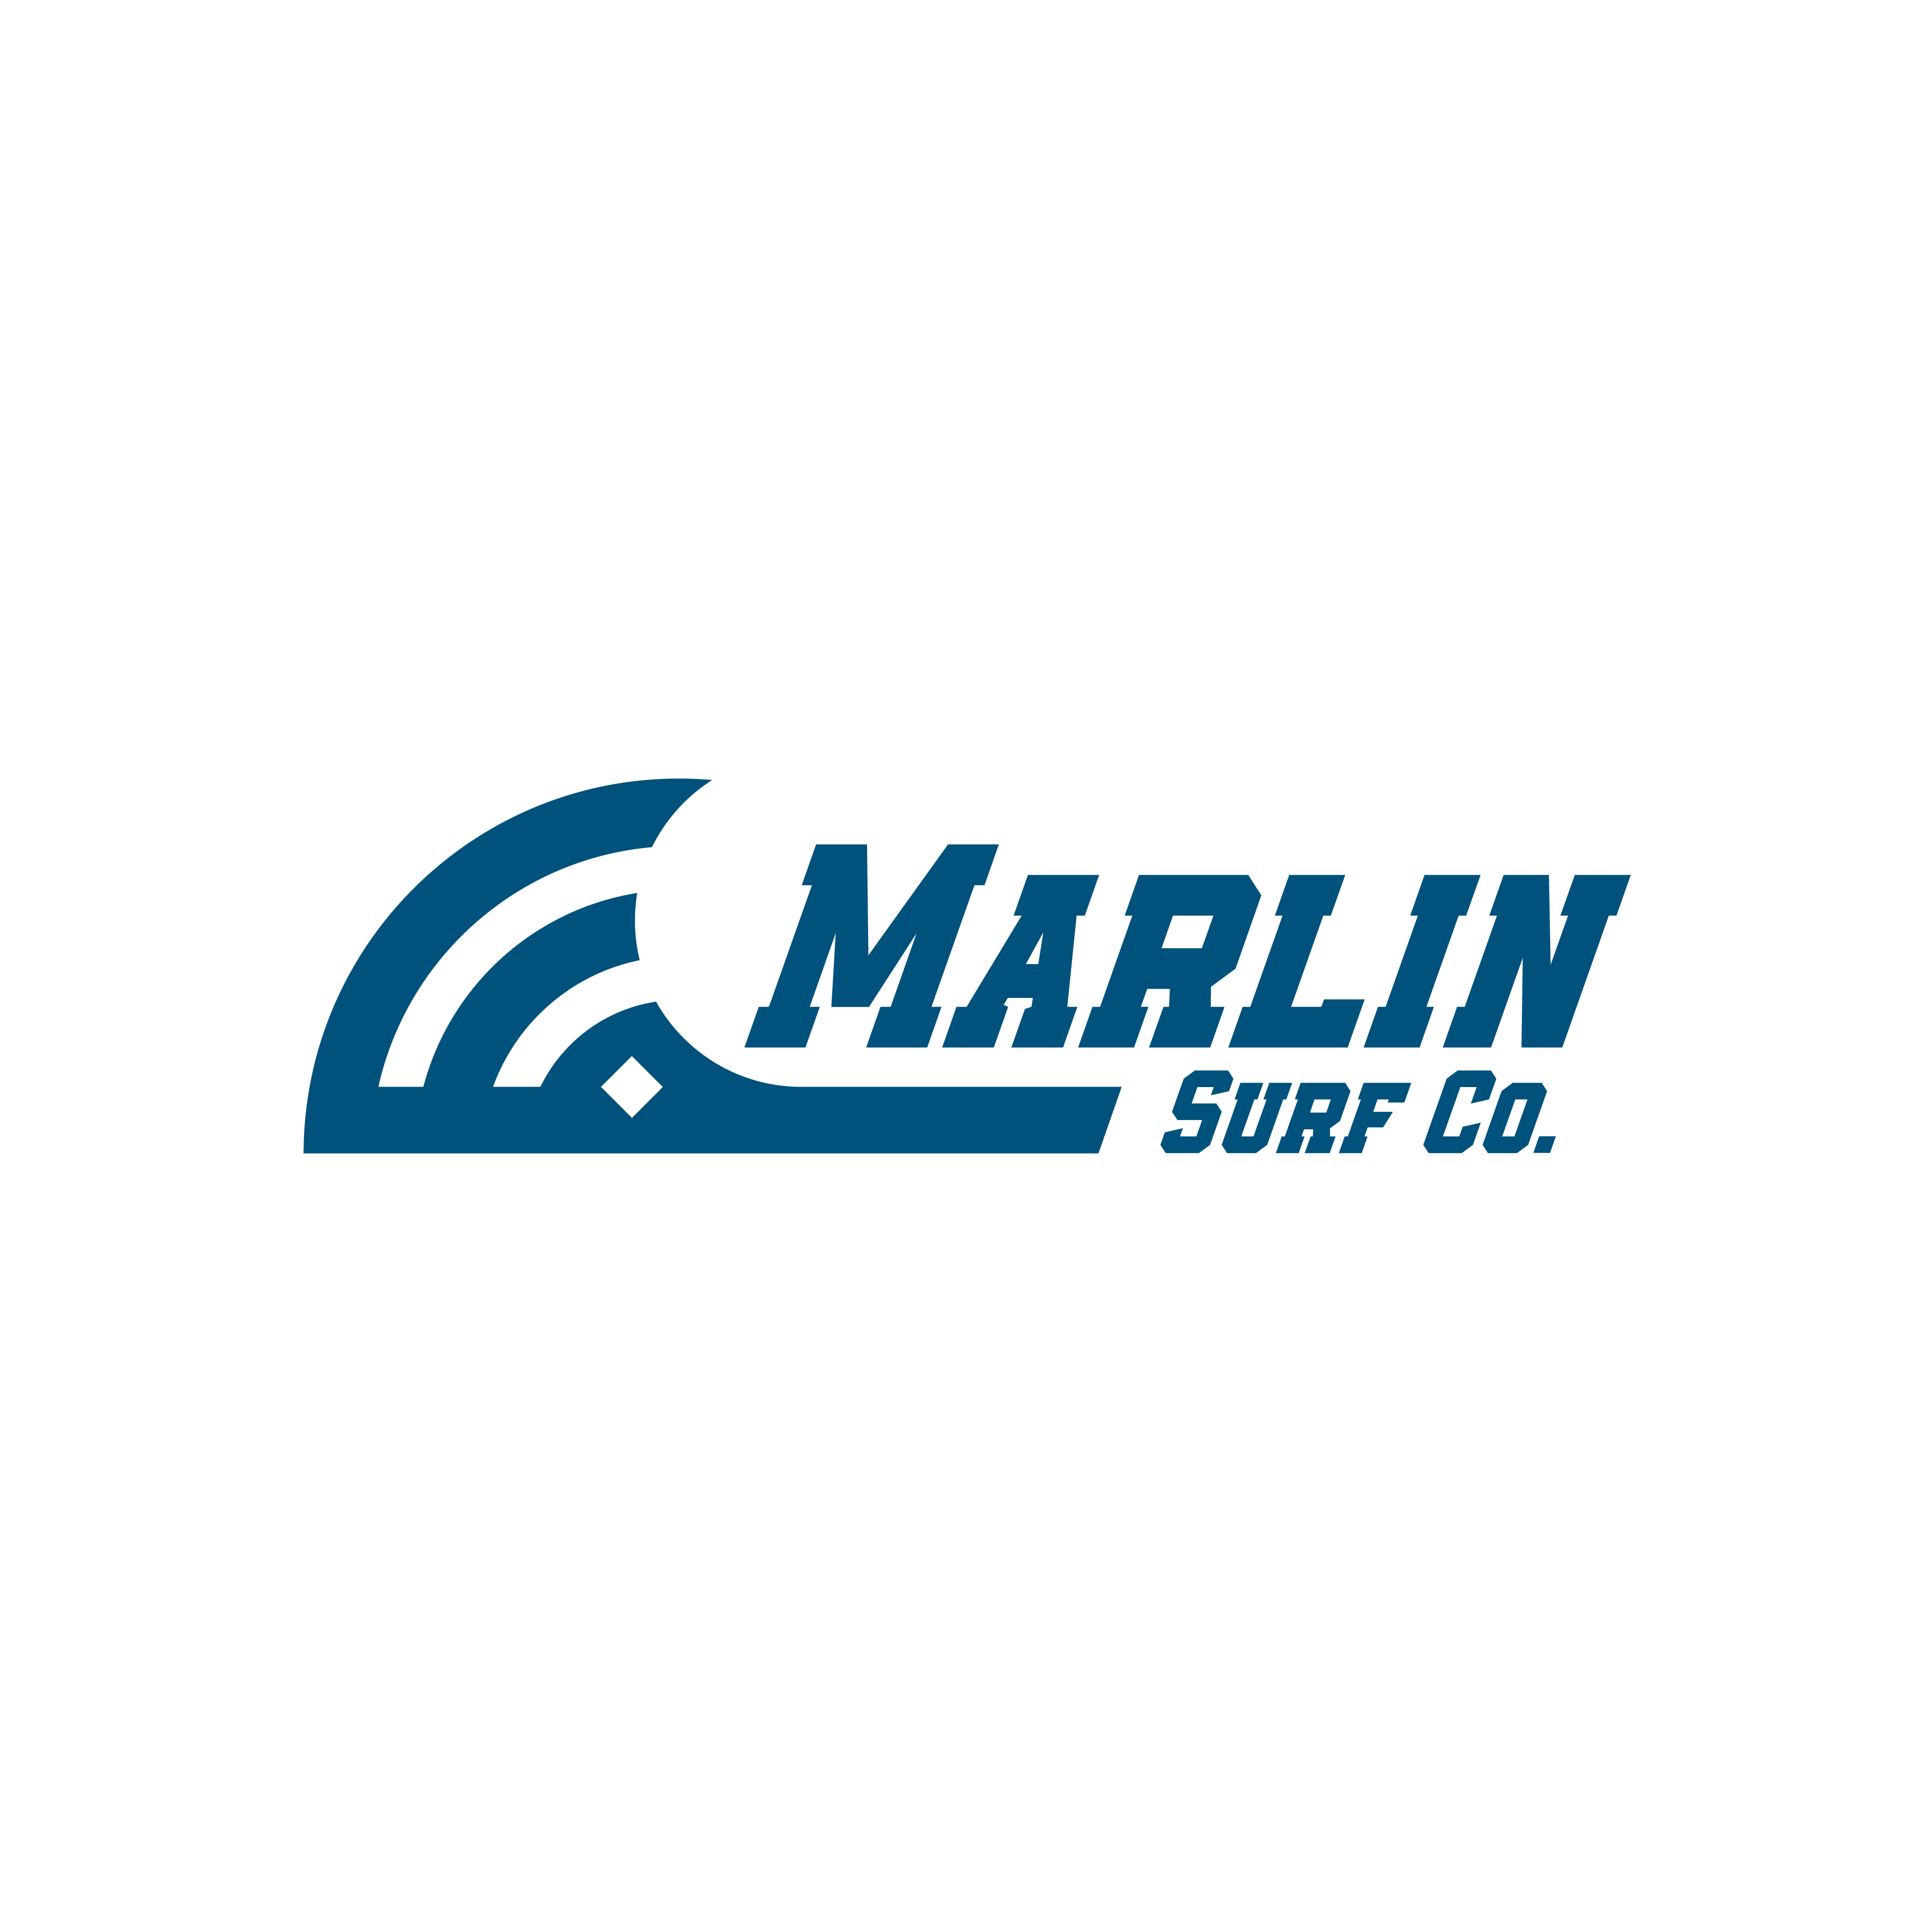 Marlin Surf Co. logo design by logo designer L.L. Peach for your inspiration and for the worlds largest logo competition